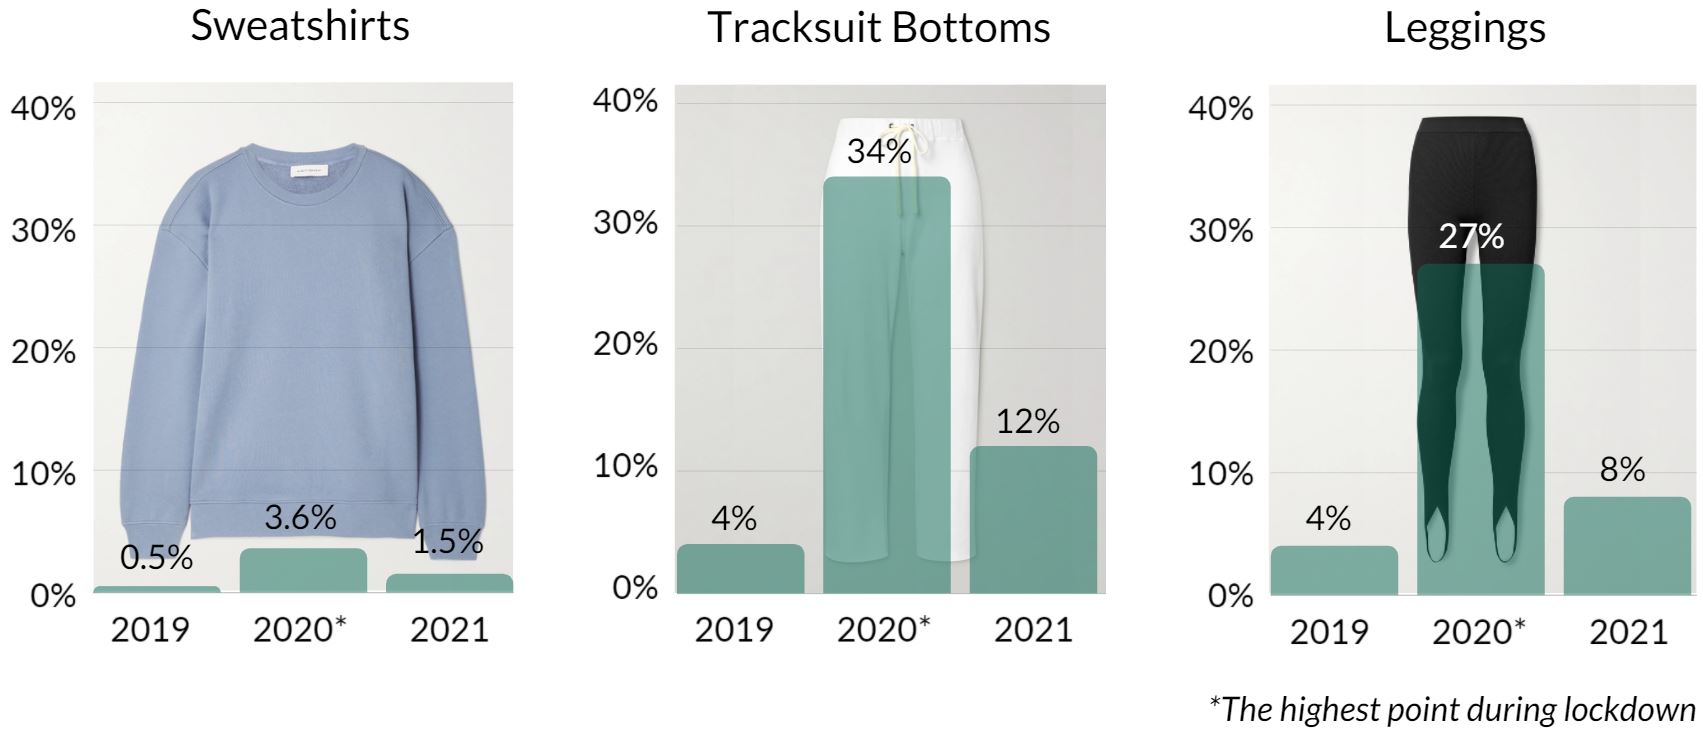 Rise and fall of sweatshirts, tracksuit bottoms, and leggings as a percentage of total activewear mix in 2019, 2020, and 2021